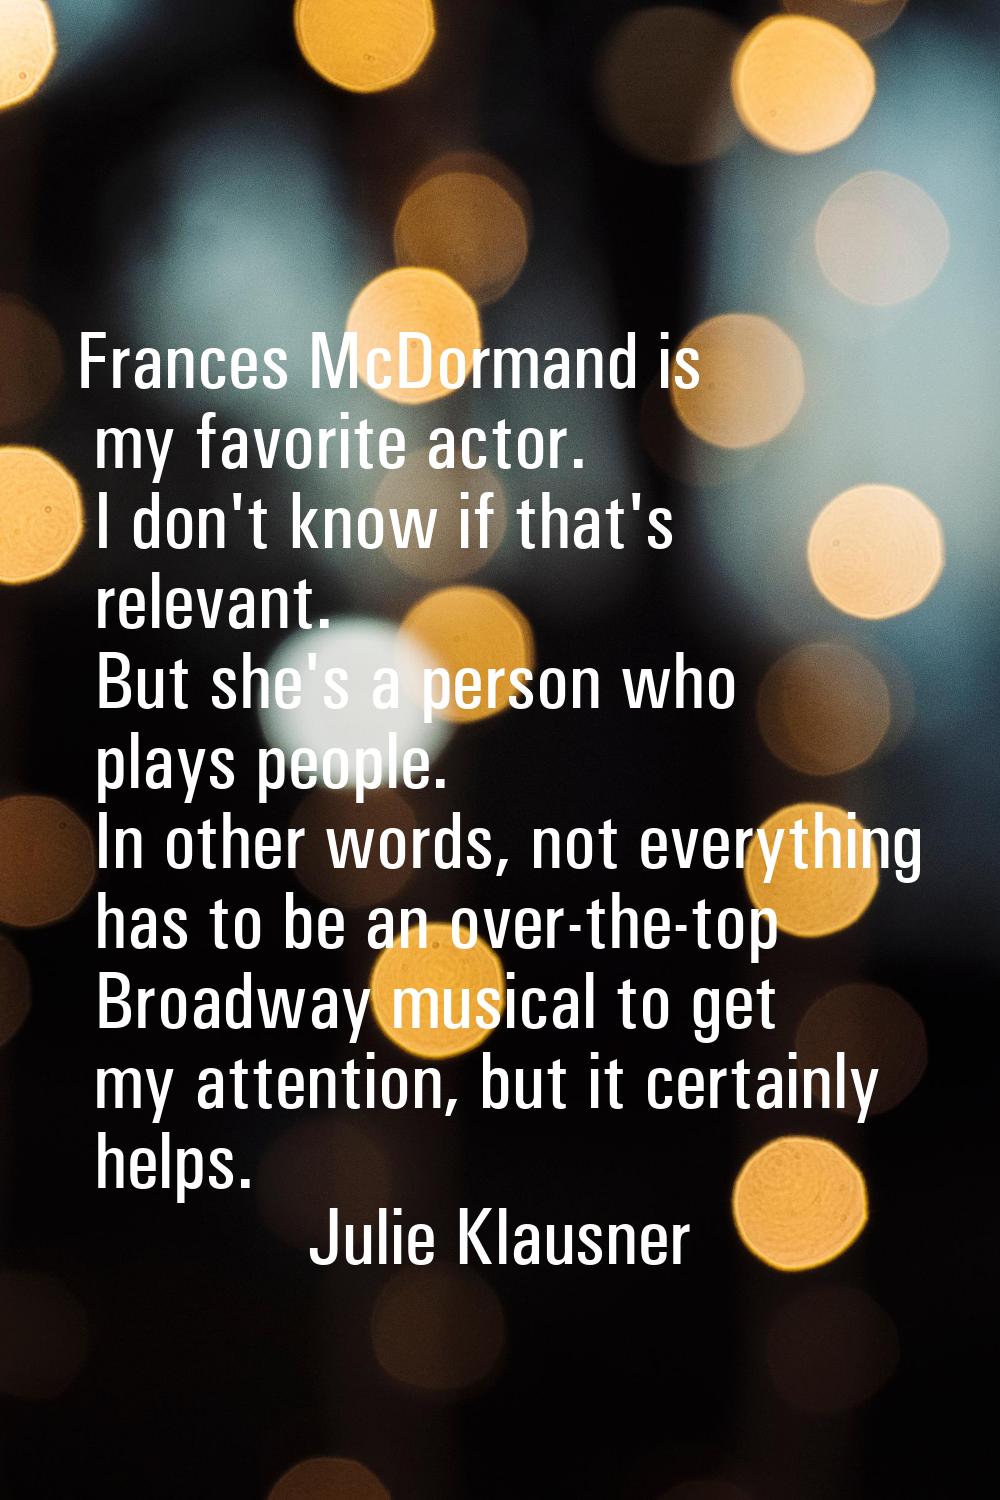 Frances McDormand is my favorite actor. I don't know if that's relevant. But she's a person who pla